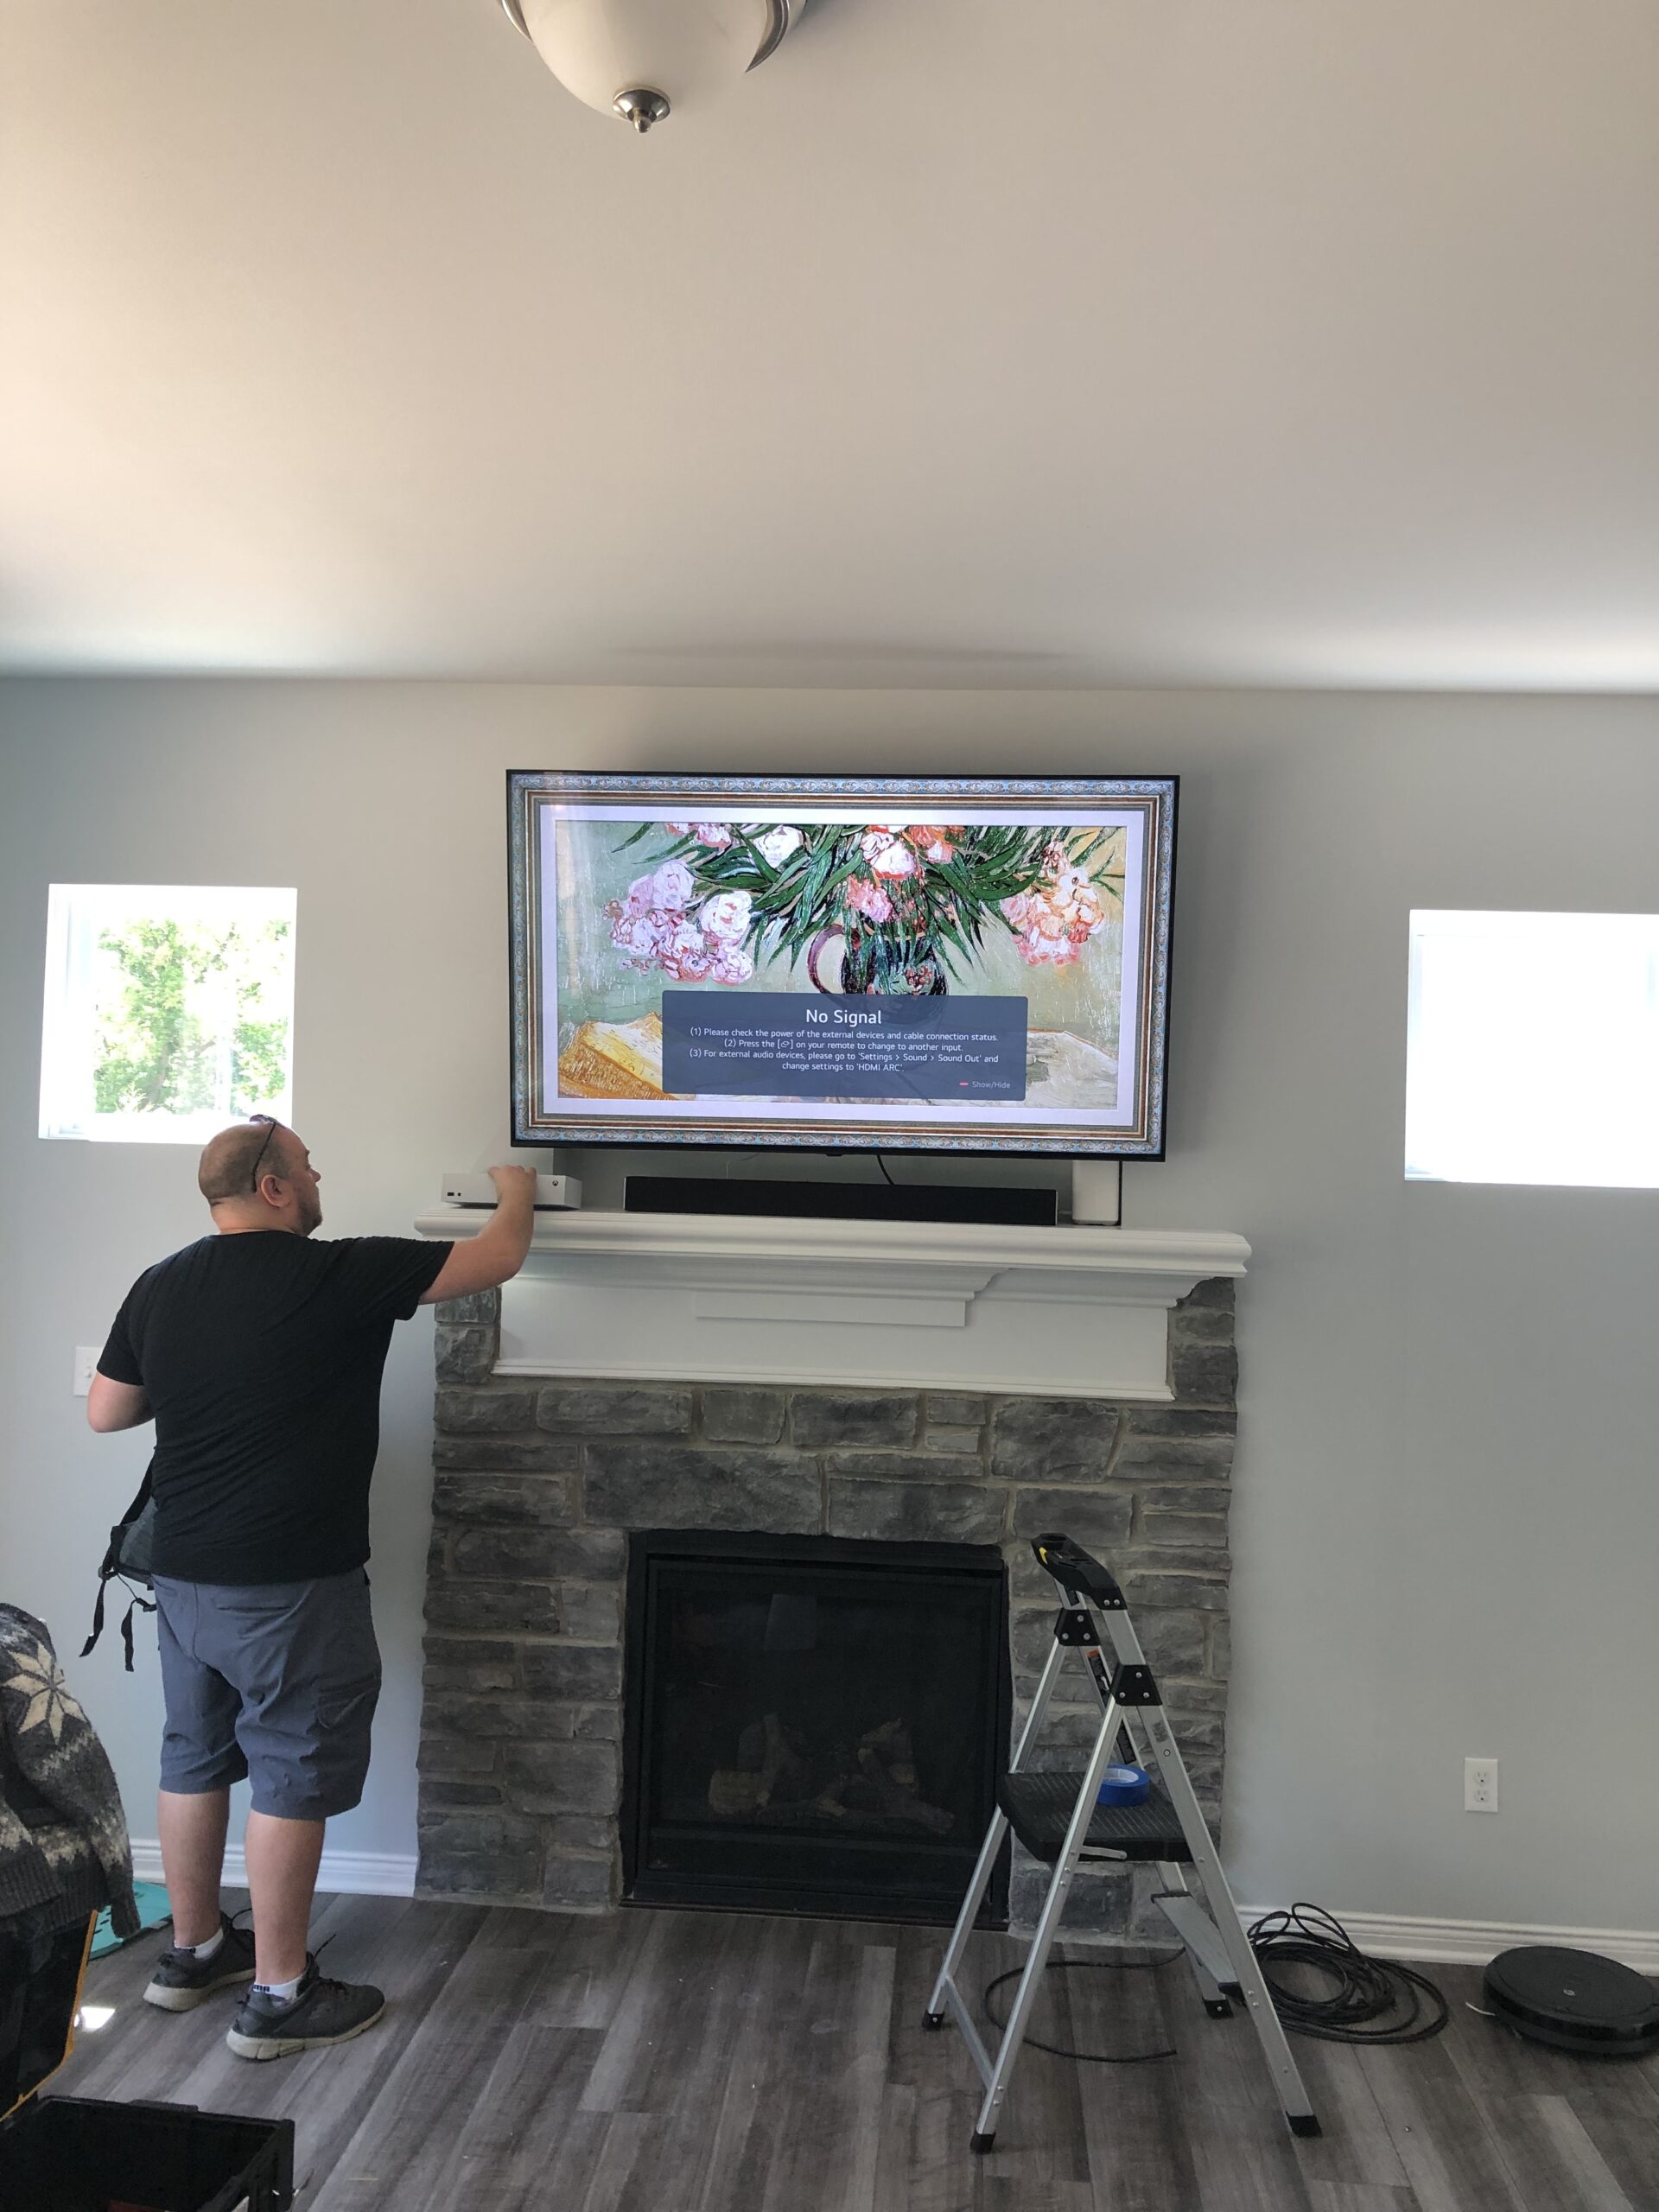 Hanging a TV above a fireplace